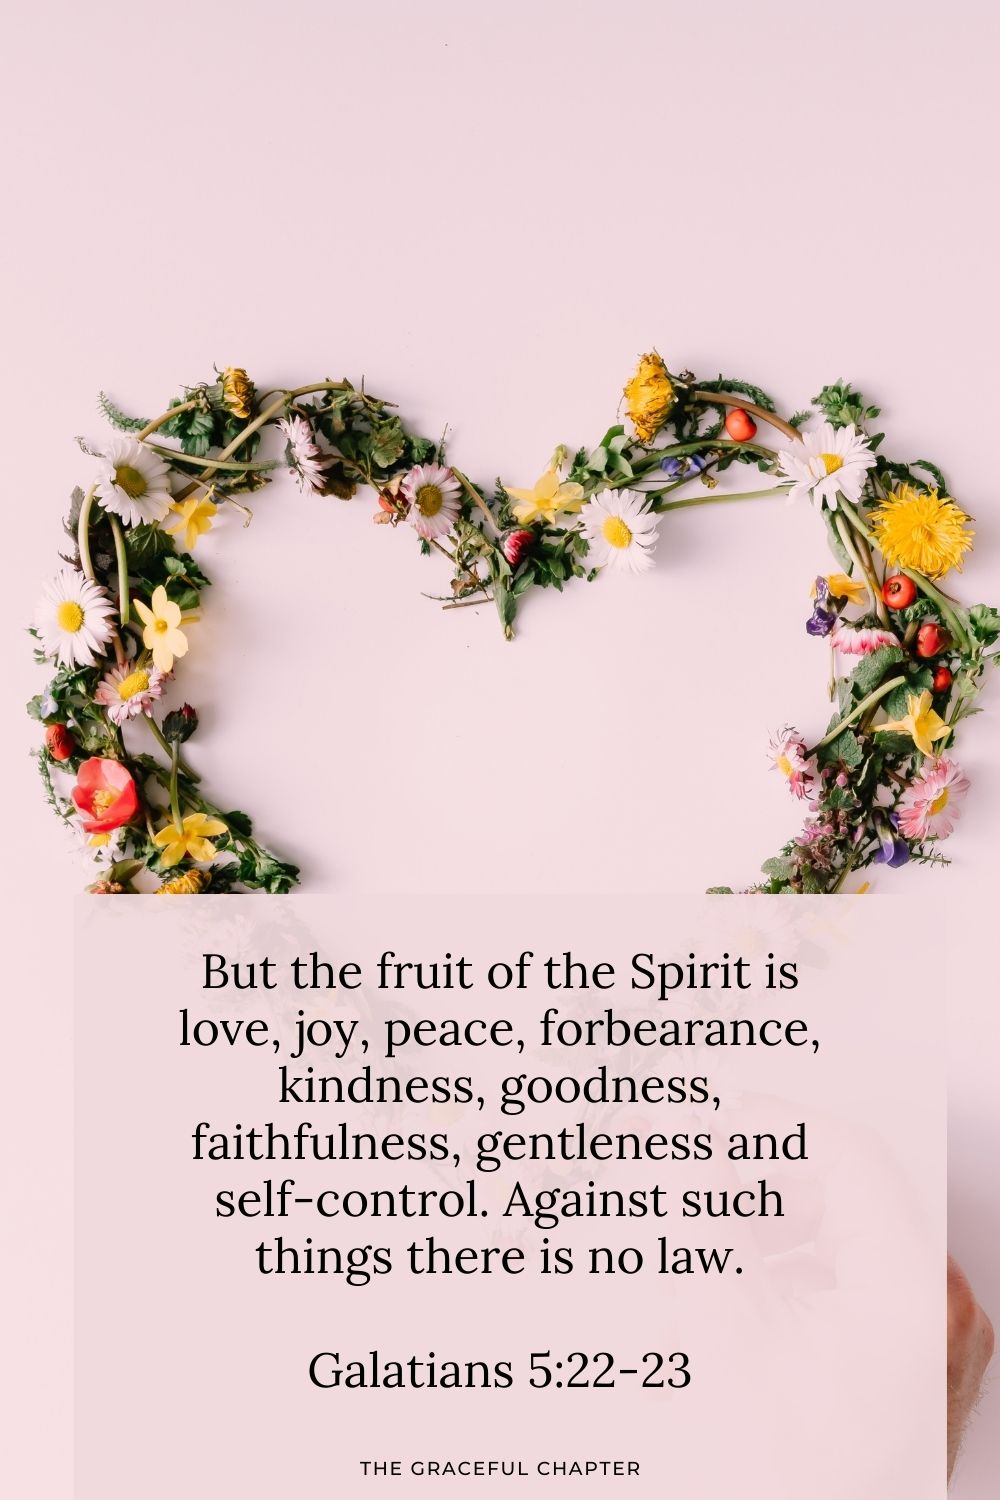 But the fruit of the Spirit is love, joy, peace, forbearance, kindness, goodness, faithfulness, gentleness and self-control. Against such things there is no law. Galatians 5:22-23